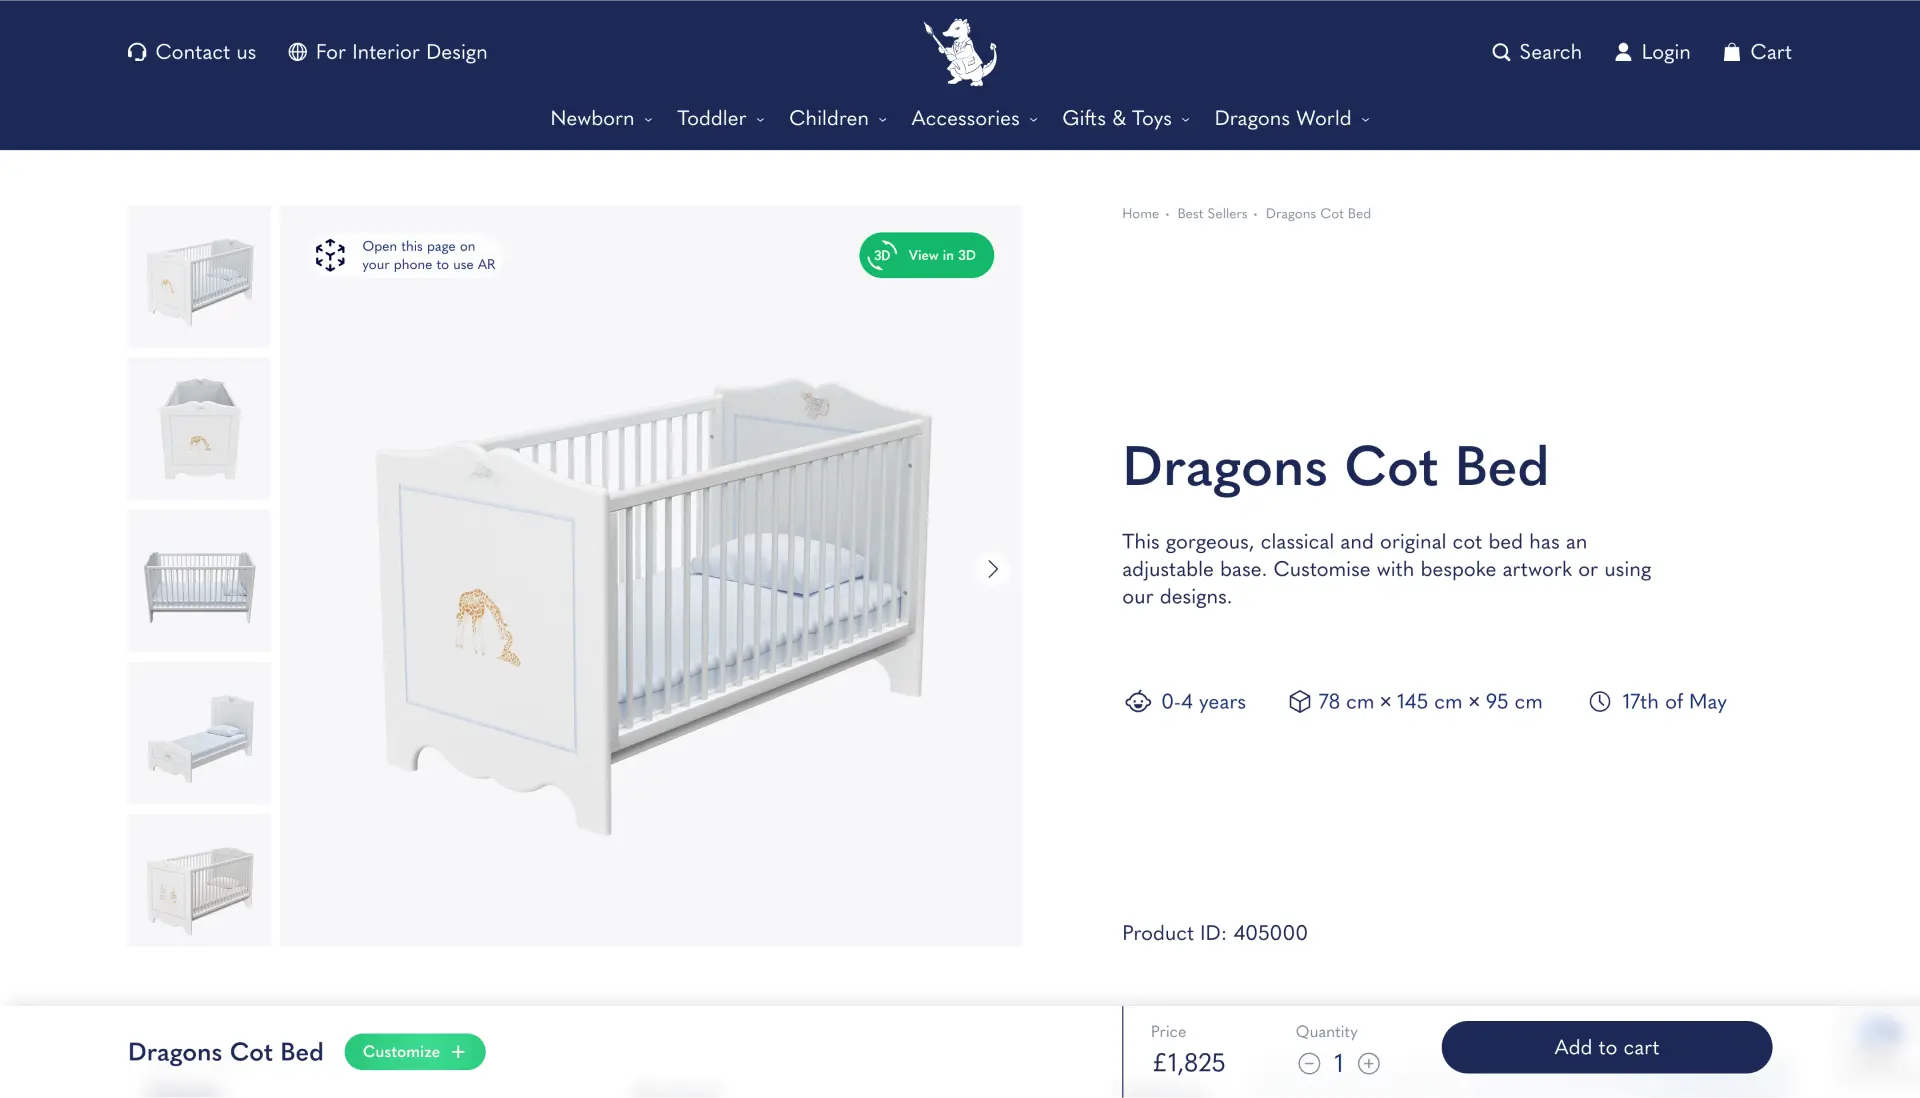 Design of Dragons of Walton Street Shopify store product page